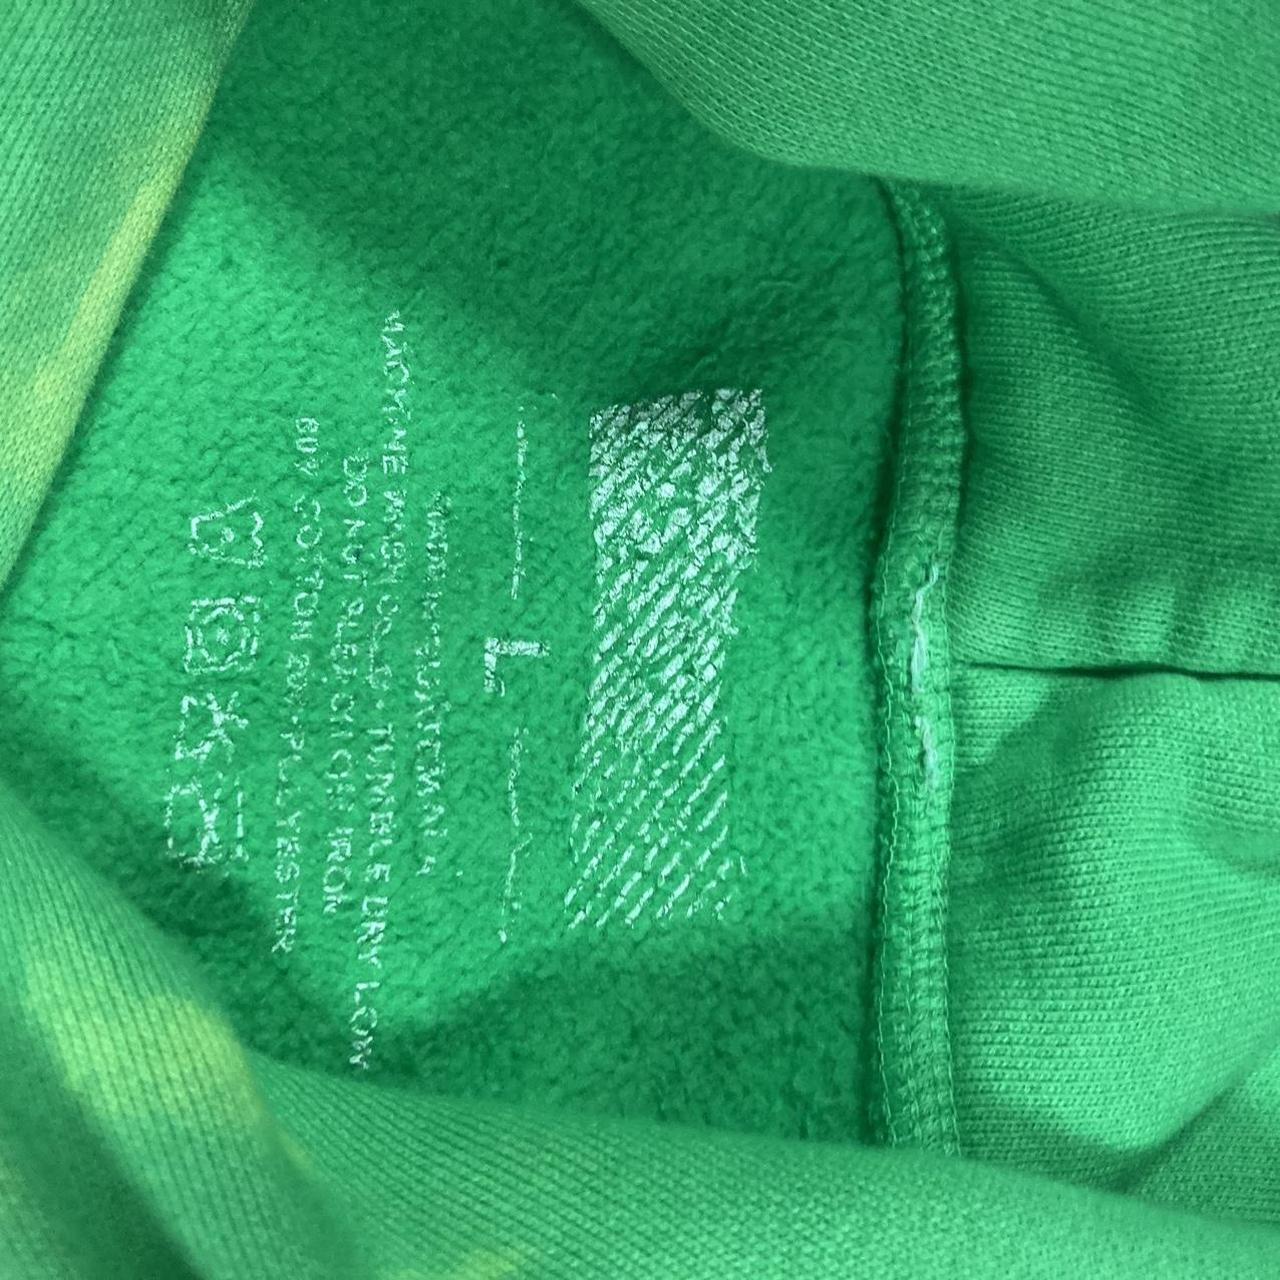 2022 Green Baby Keem Tour Hoodie Size L But Fits... - Depop